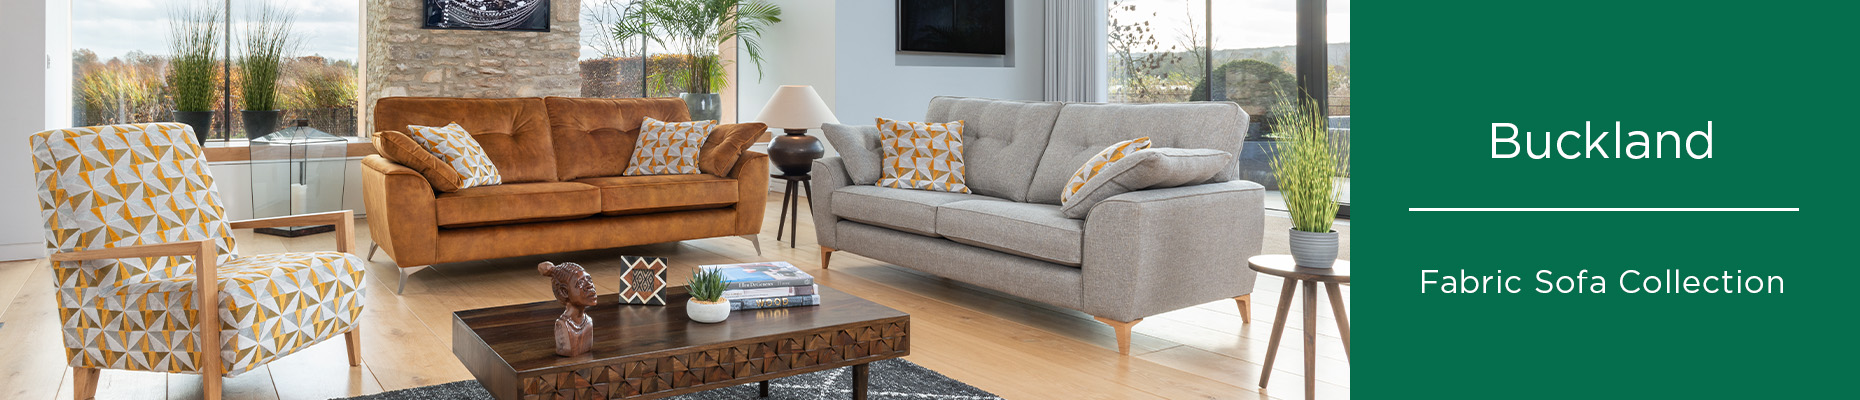 Buckland Sofa Collection by Alstons Uholstery at Forrest Furnishing